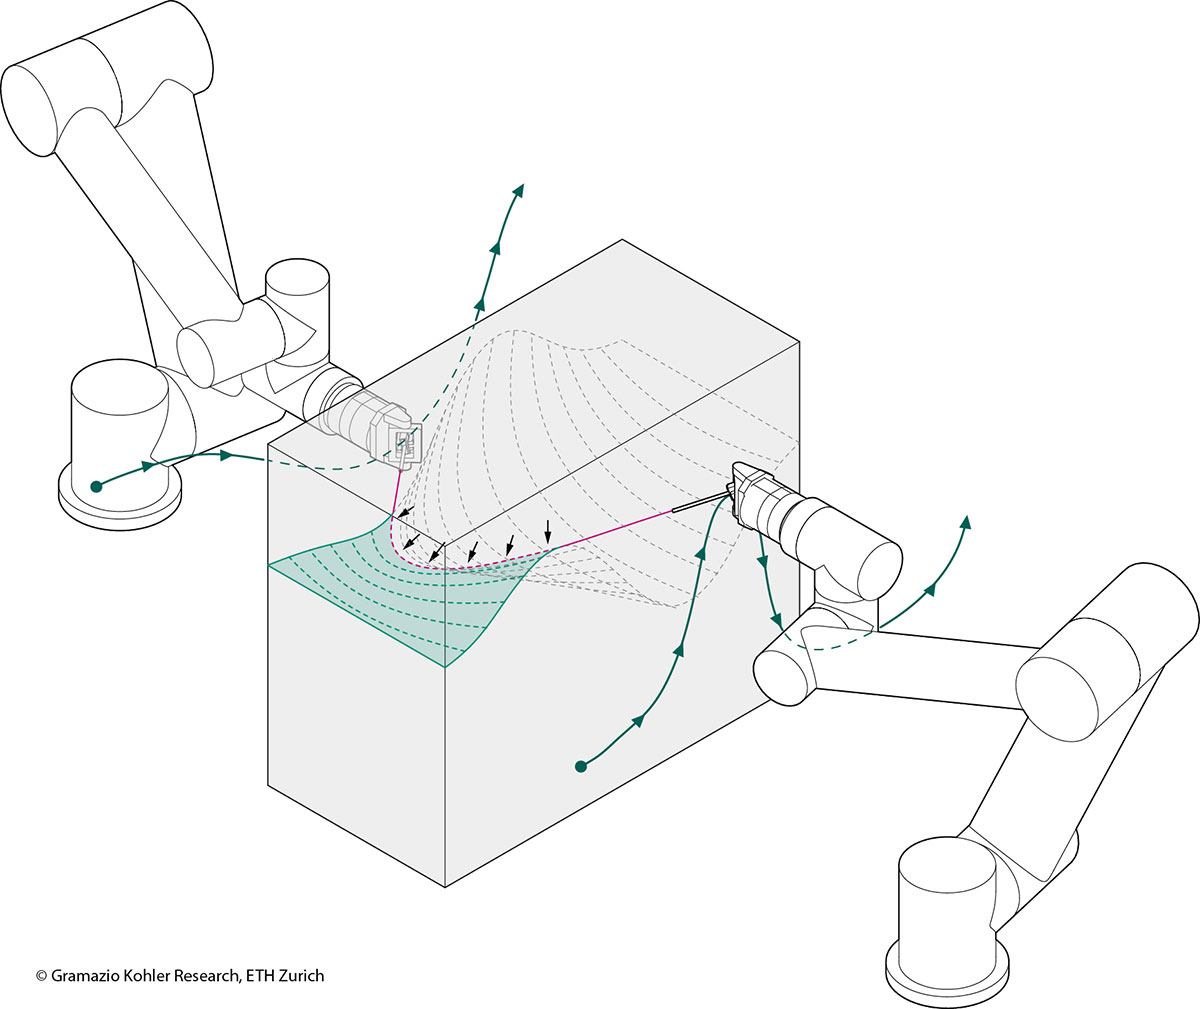 Robotic Control Strategies Applicable to Architectural Design